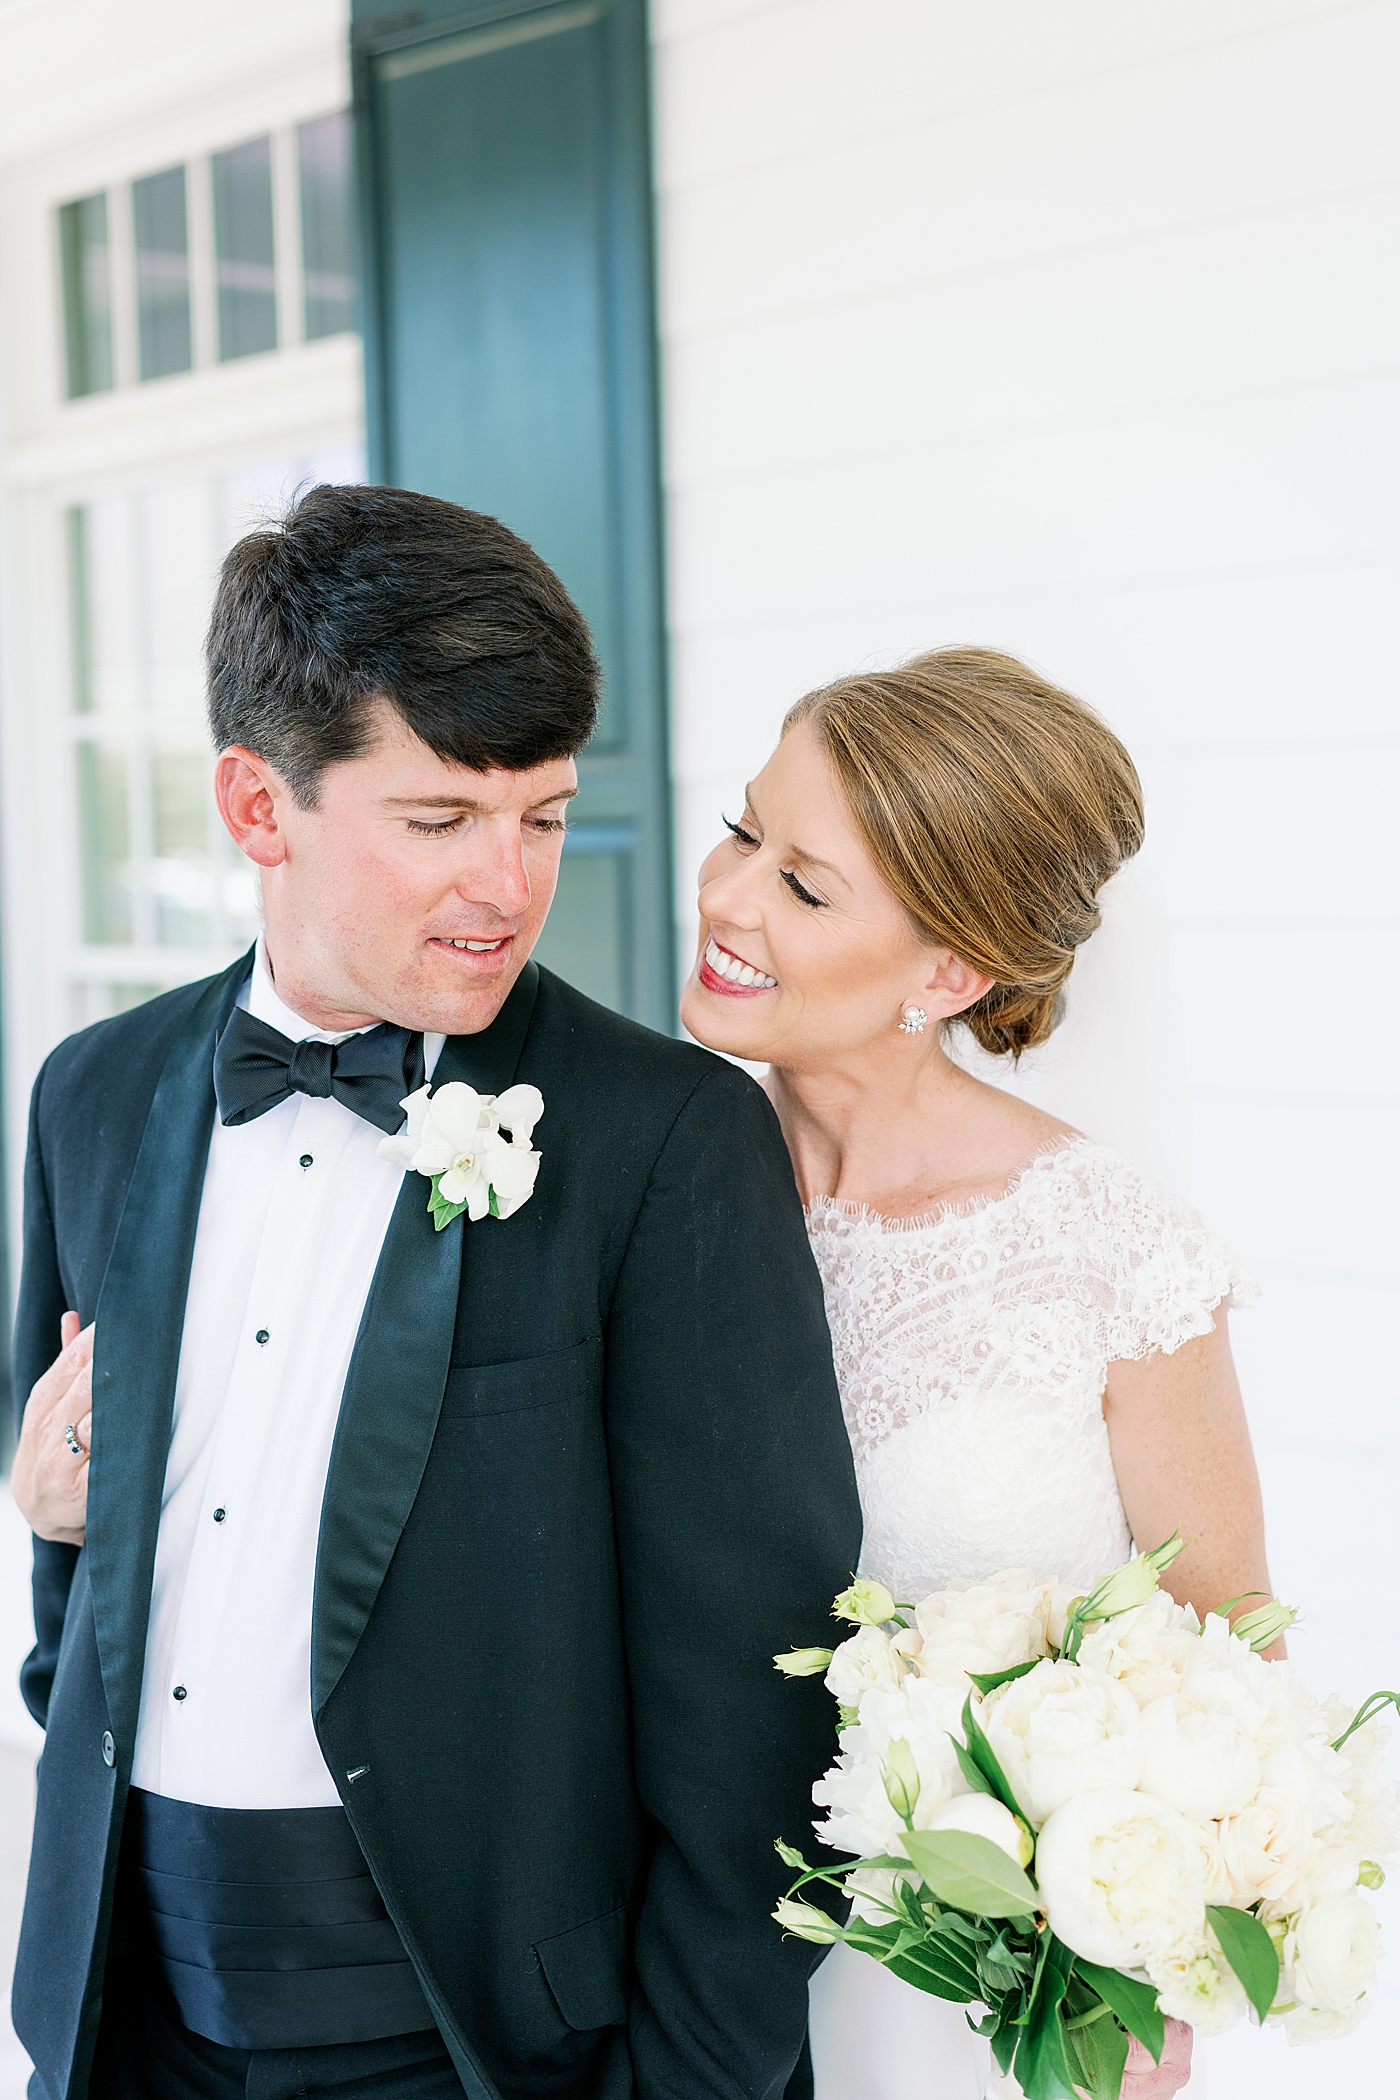 Bride and groom snuggling after their first look in formal attire | Image by Annie Laura Photo